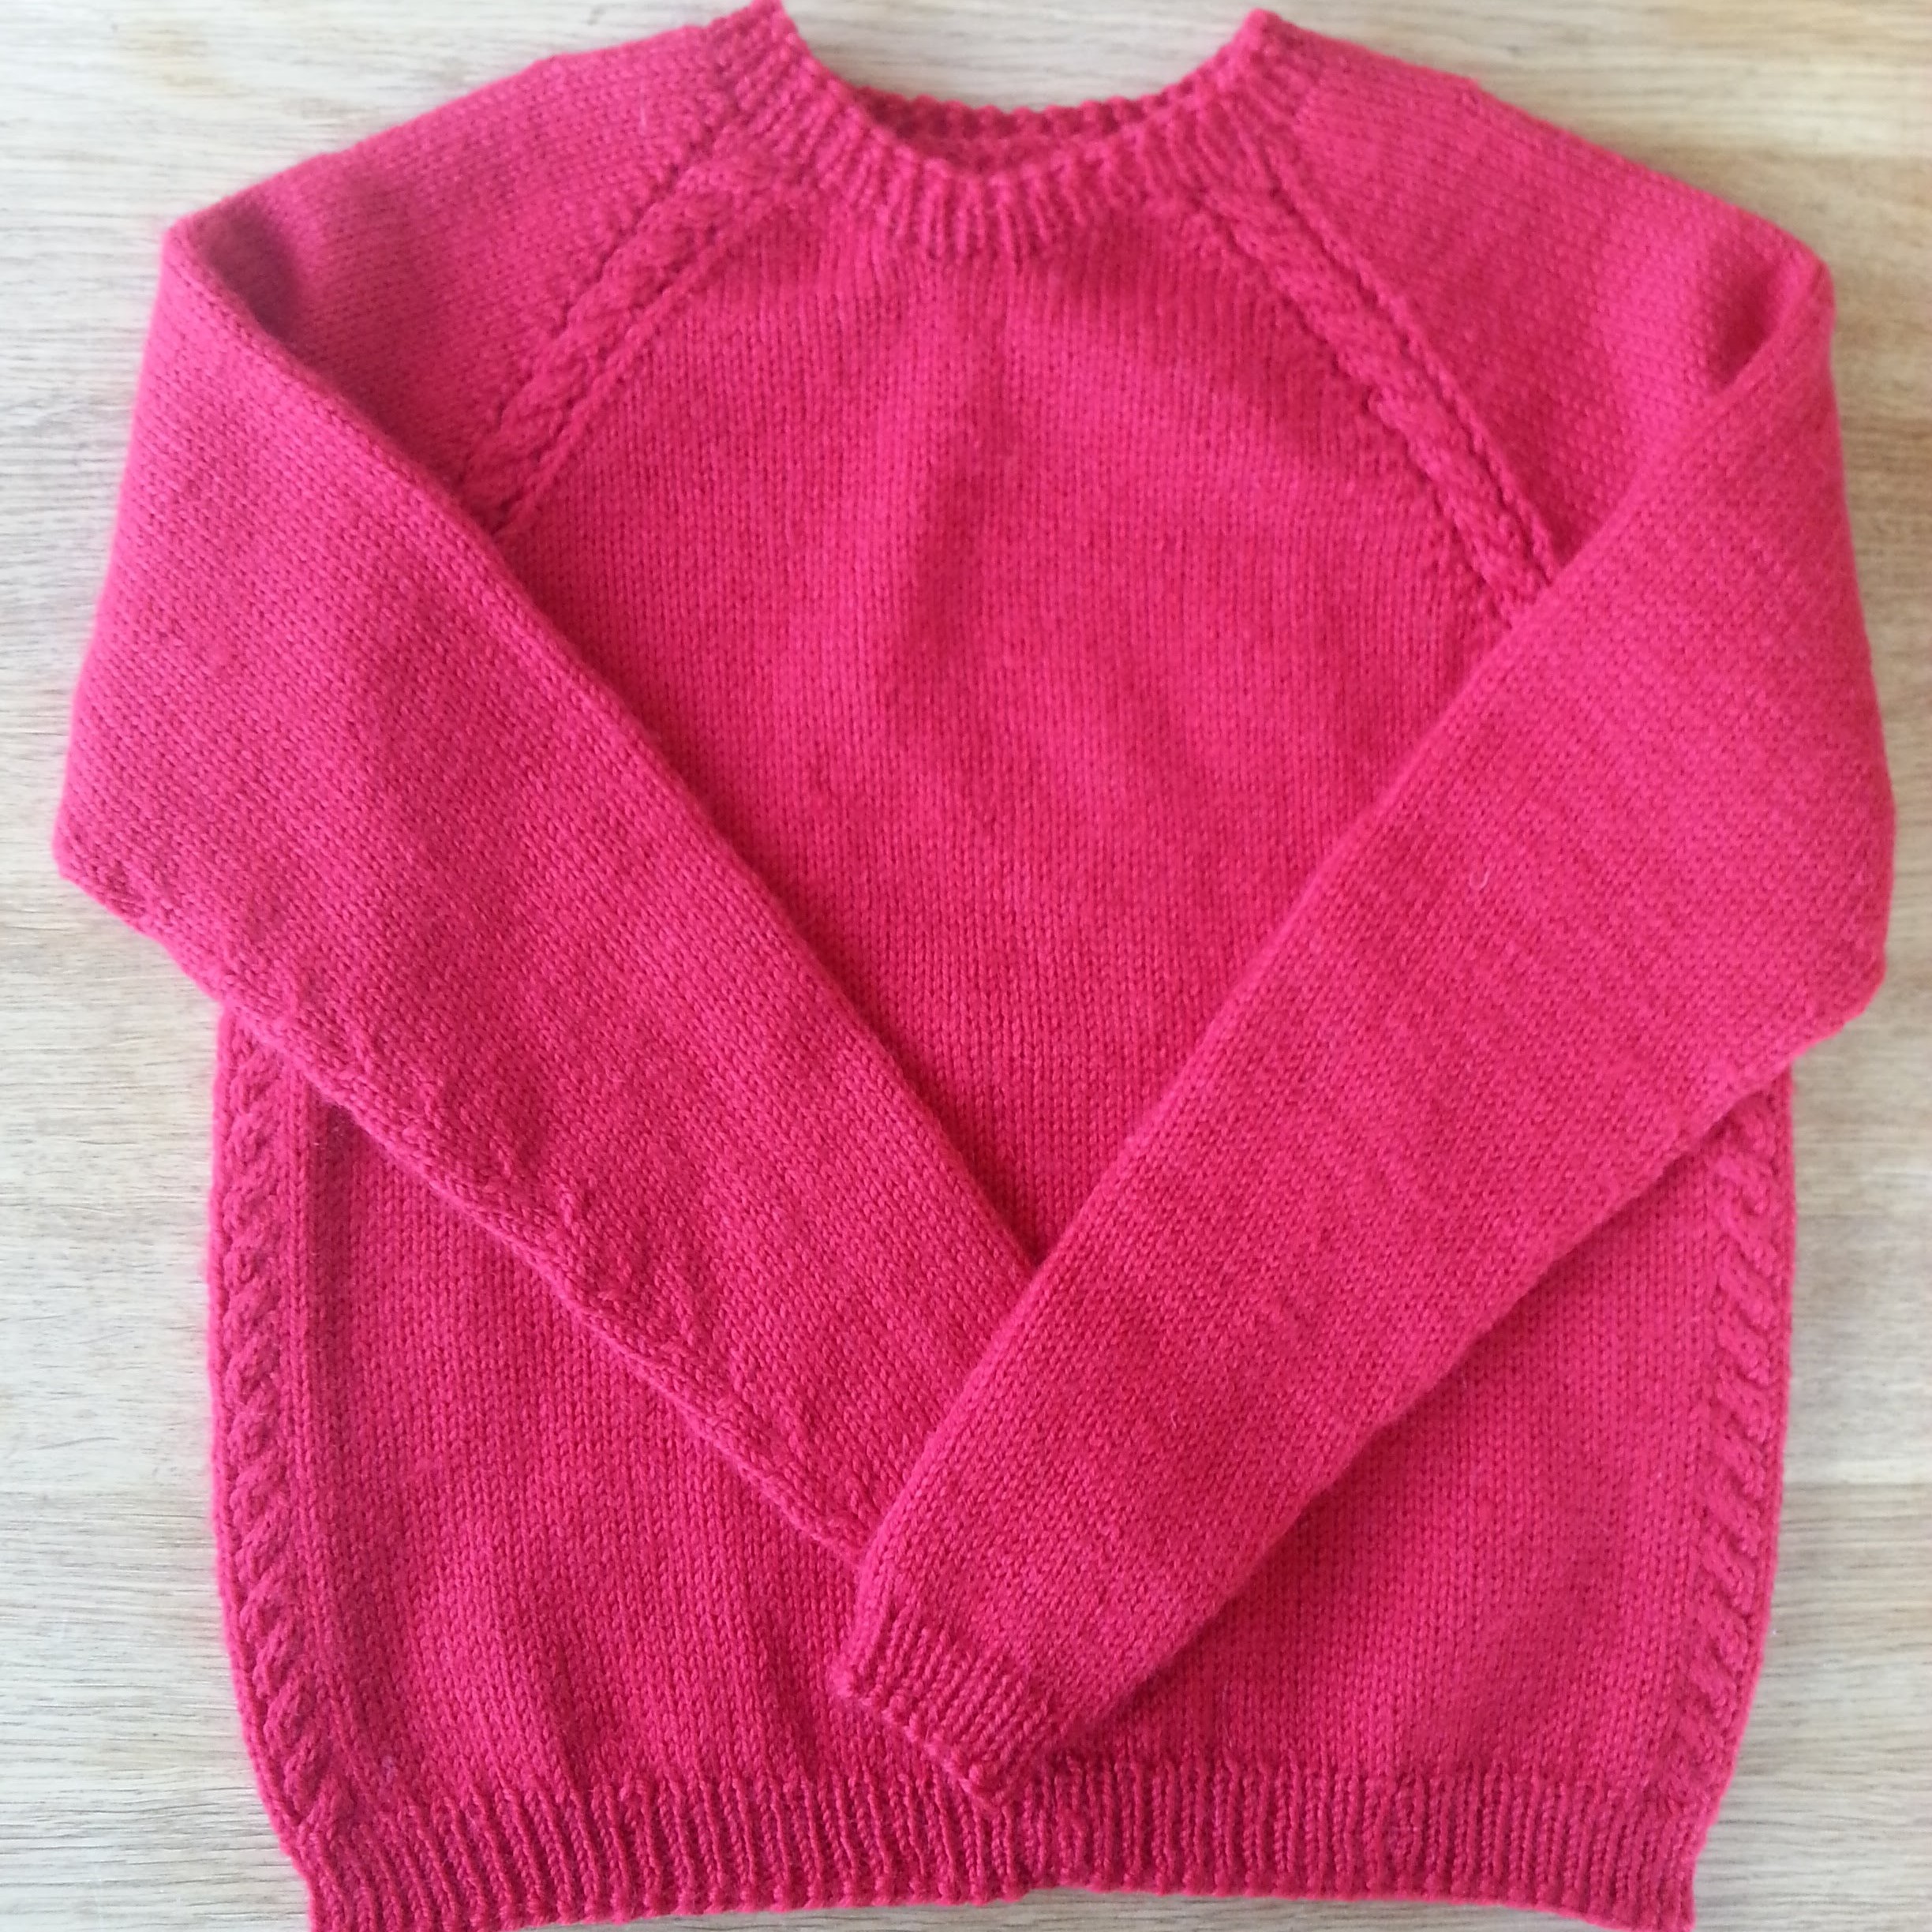 Crew neck in child size with cables